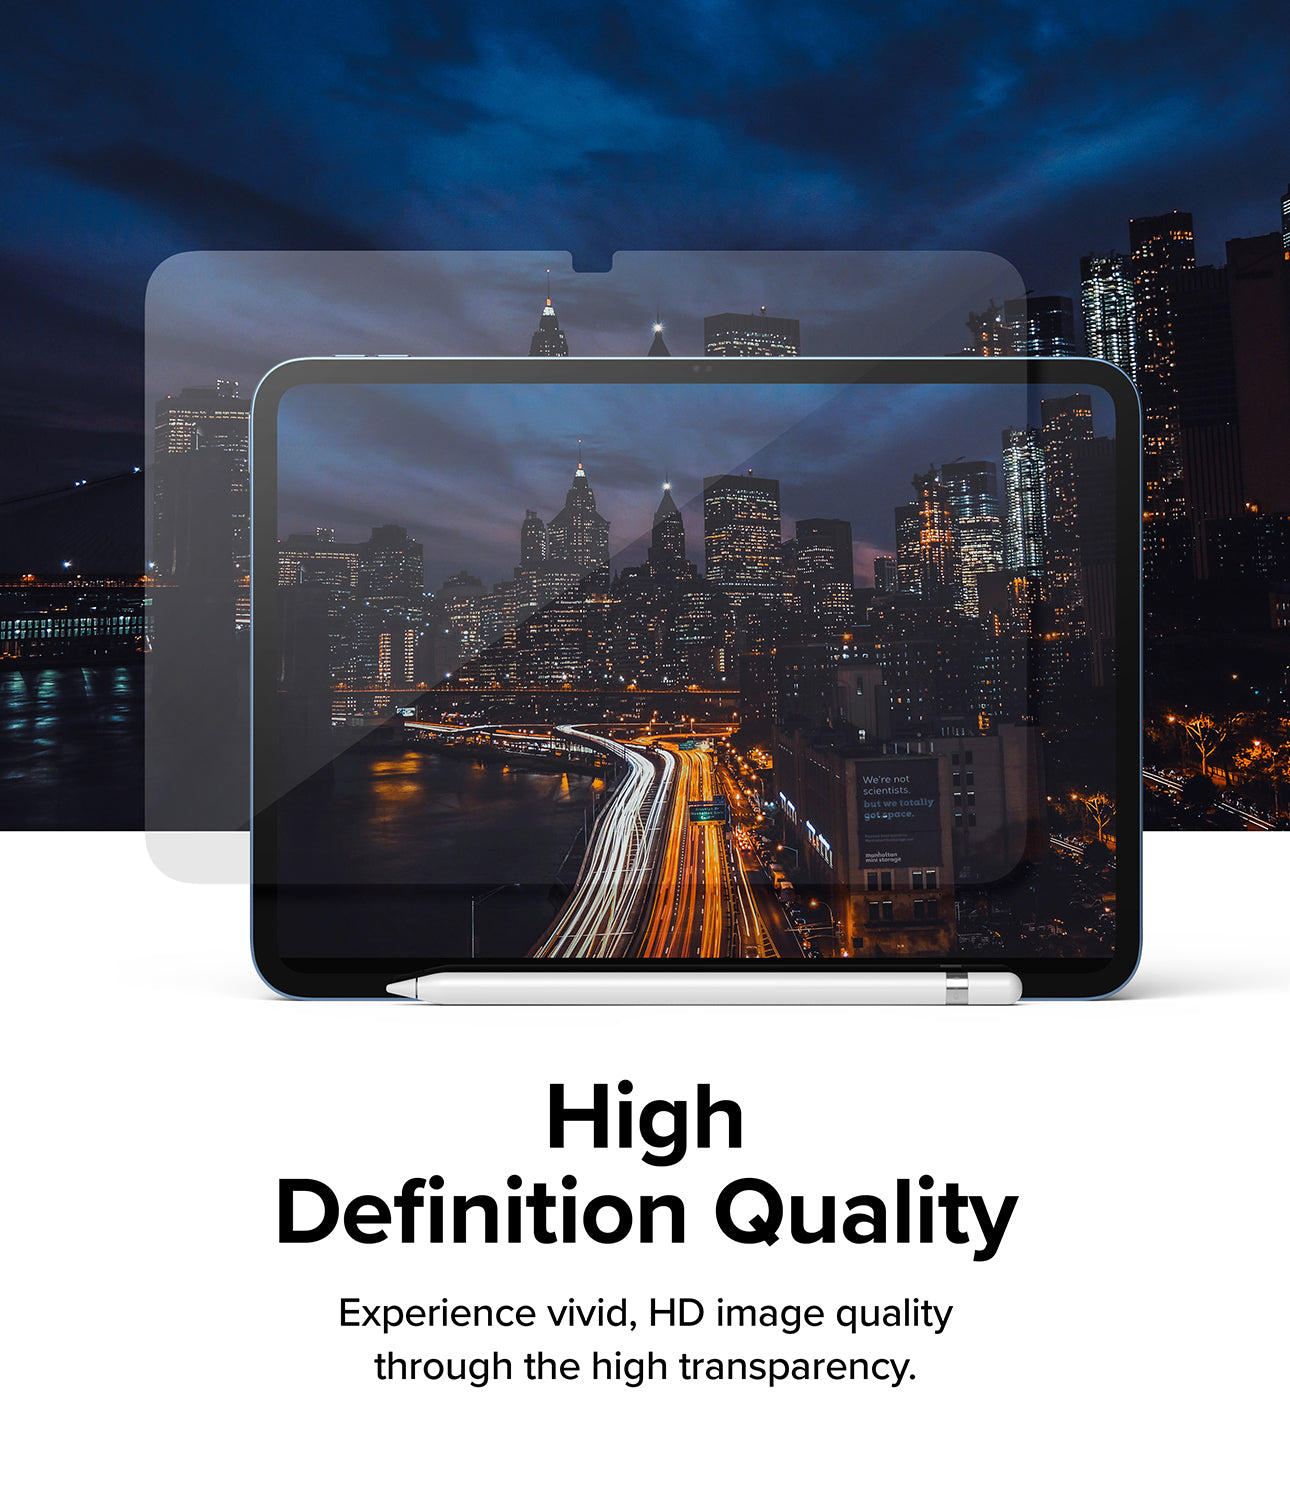 High Definition Quality - Experience vivid, HD image quality through the high transparency.